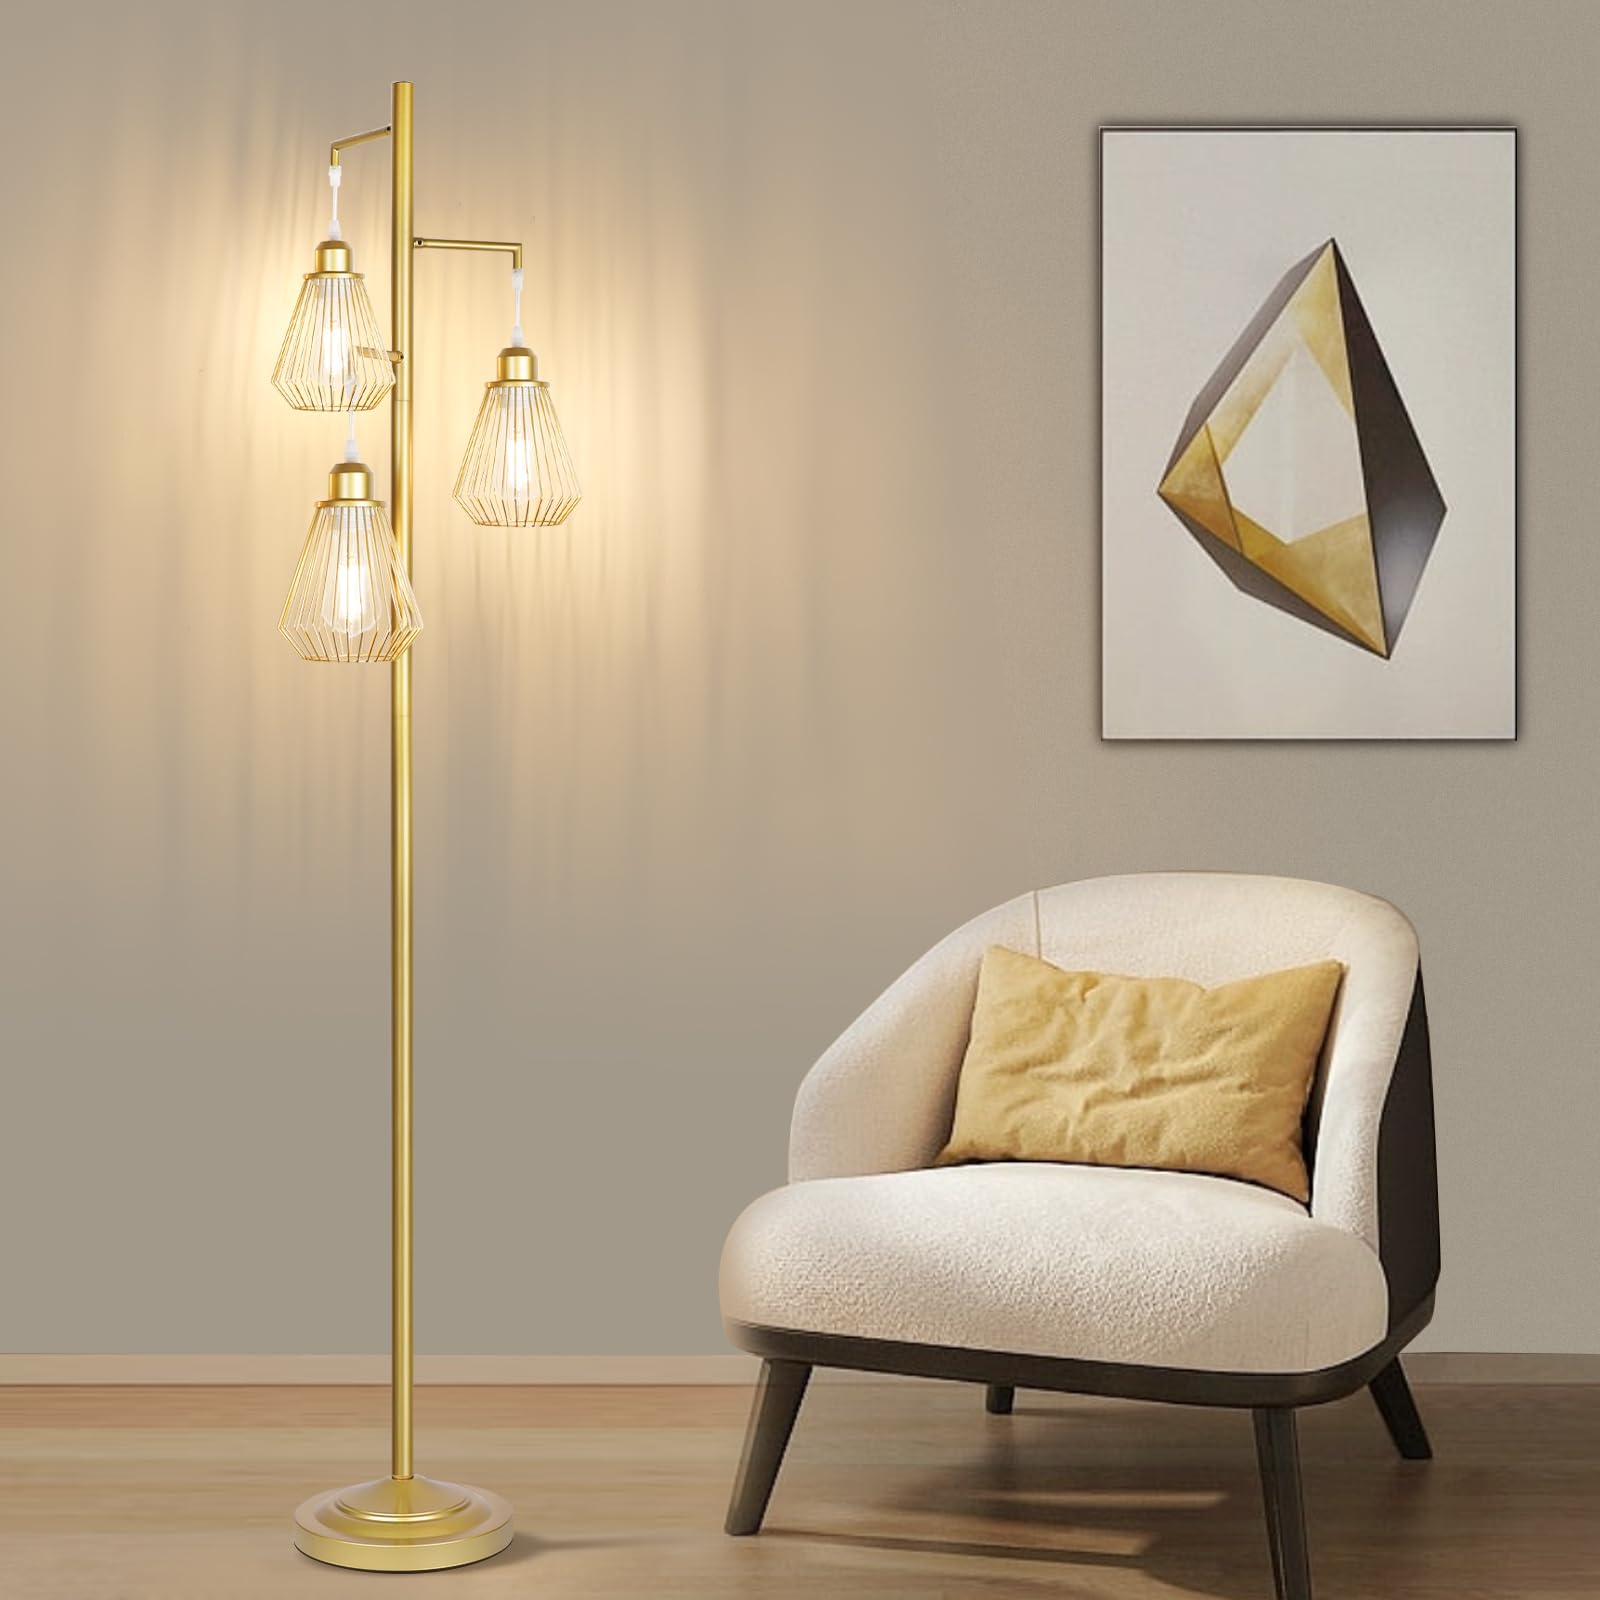 QiMH Industrial Floor Lamps for Living Room, Tree Standing Lamp with 3 Teardrop Cage Shades, 68" Modern Tall Lamps for Bedroom Office Home Light Decor, E26 Socket, Pedal Switch, Brass Gold